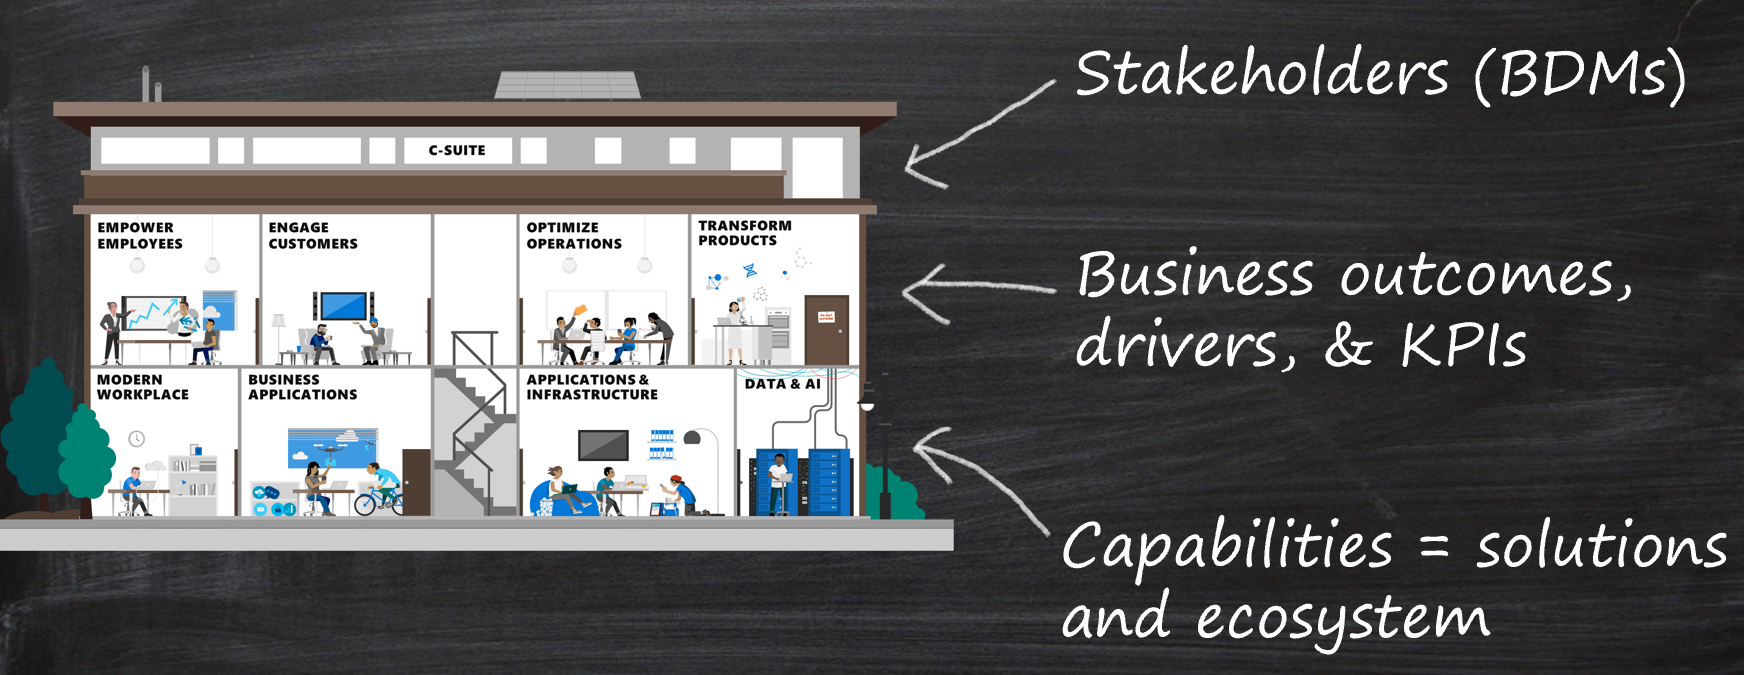 Business outcomes visualized as a house with stakeholders, over business outcomes, over technical capabilities